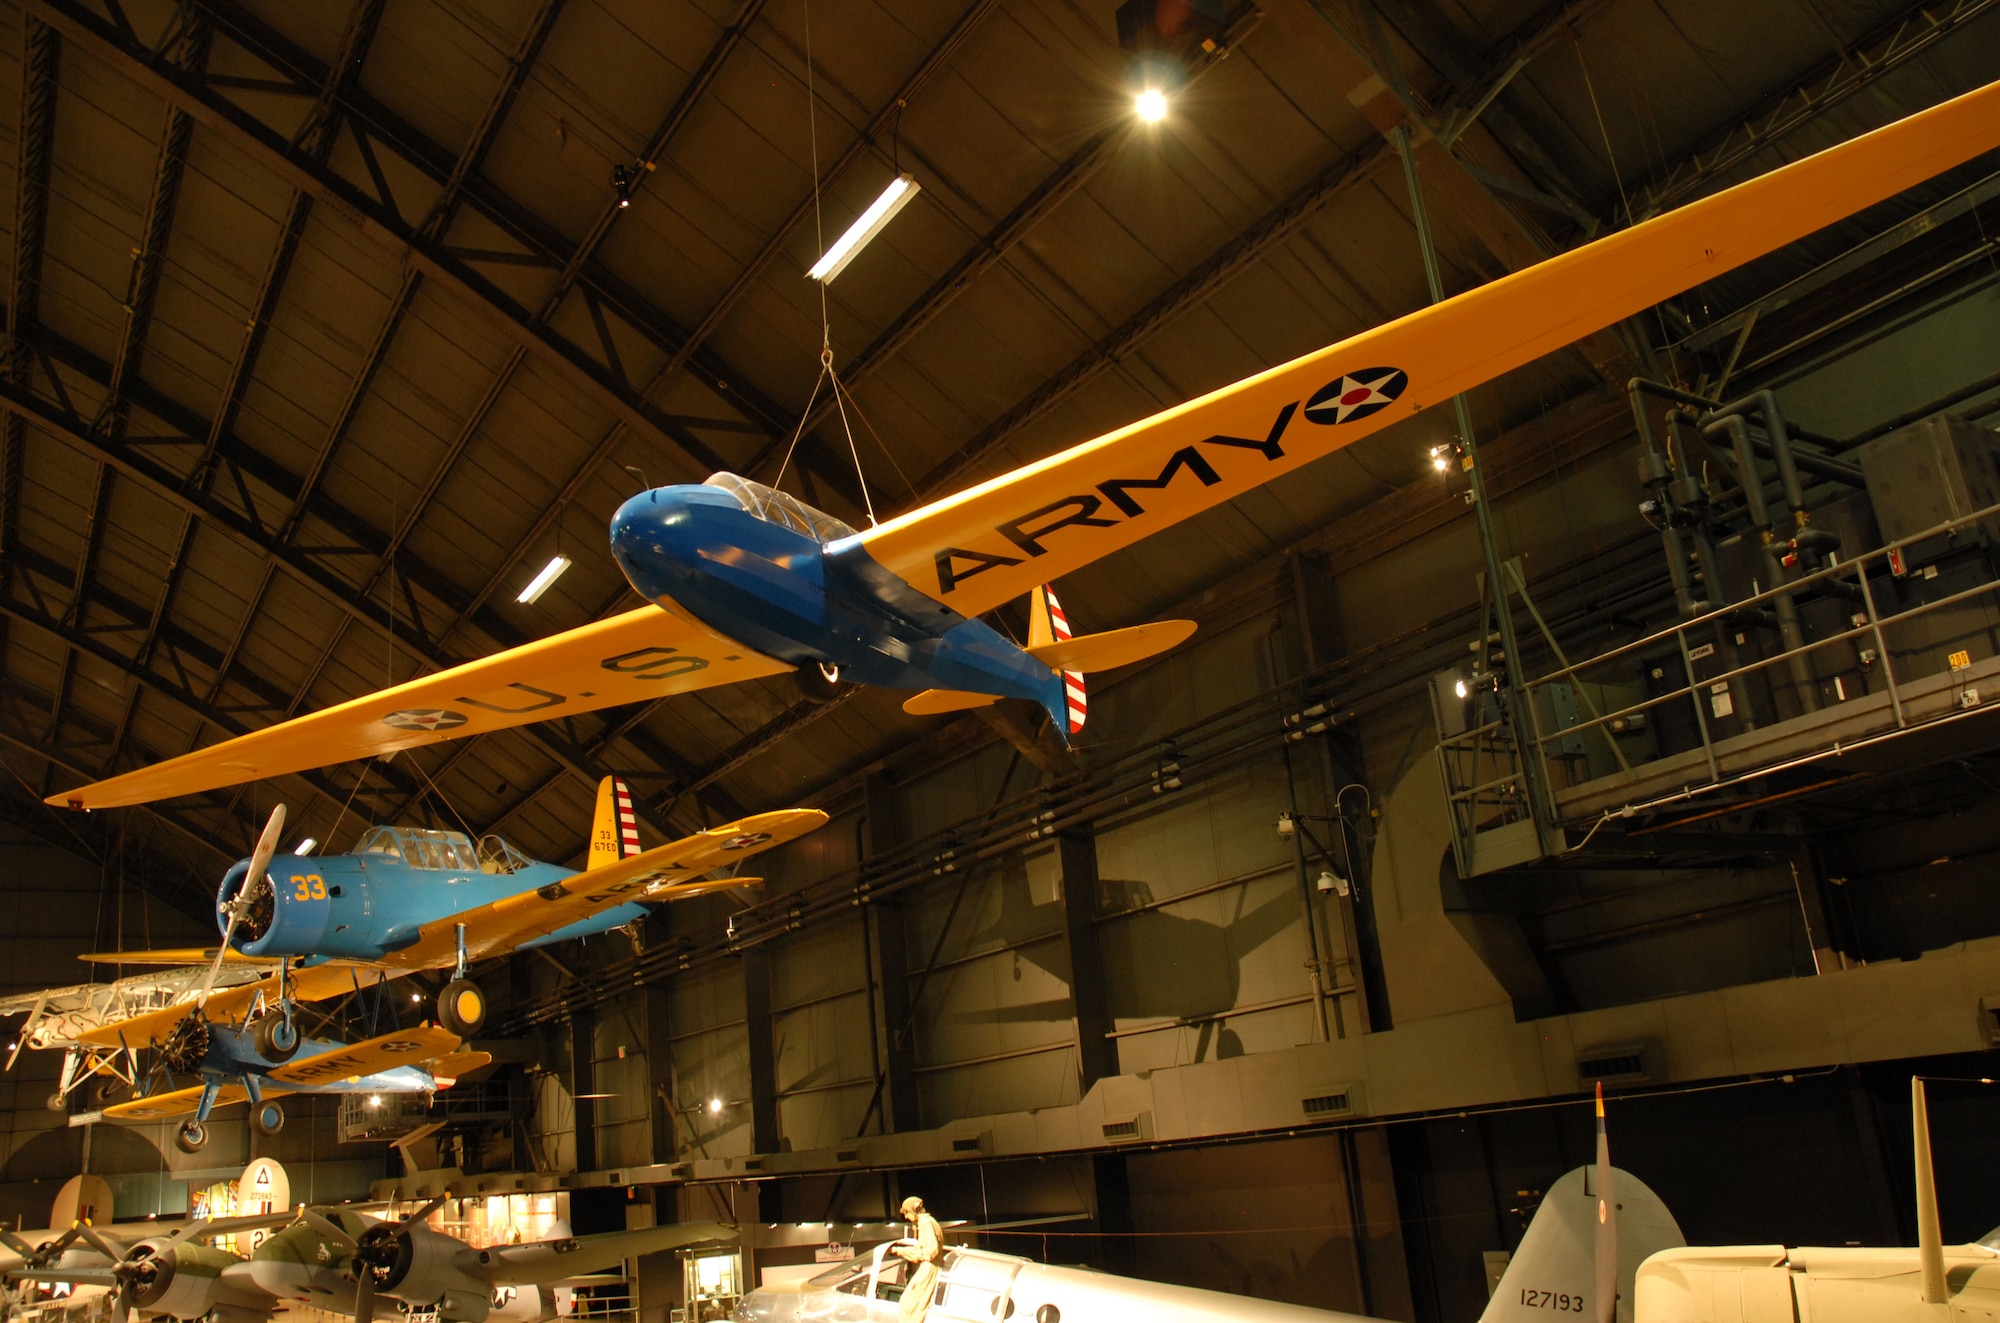 DAYTON, Ohio -- Laister-Kauffmann TG-4A in the World War II Gallery at the National Museum of the United States Air Force. (U.S. Air Force photo)